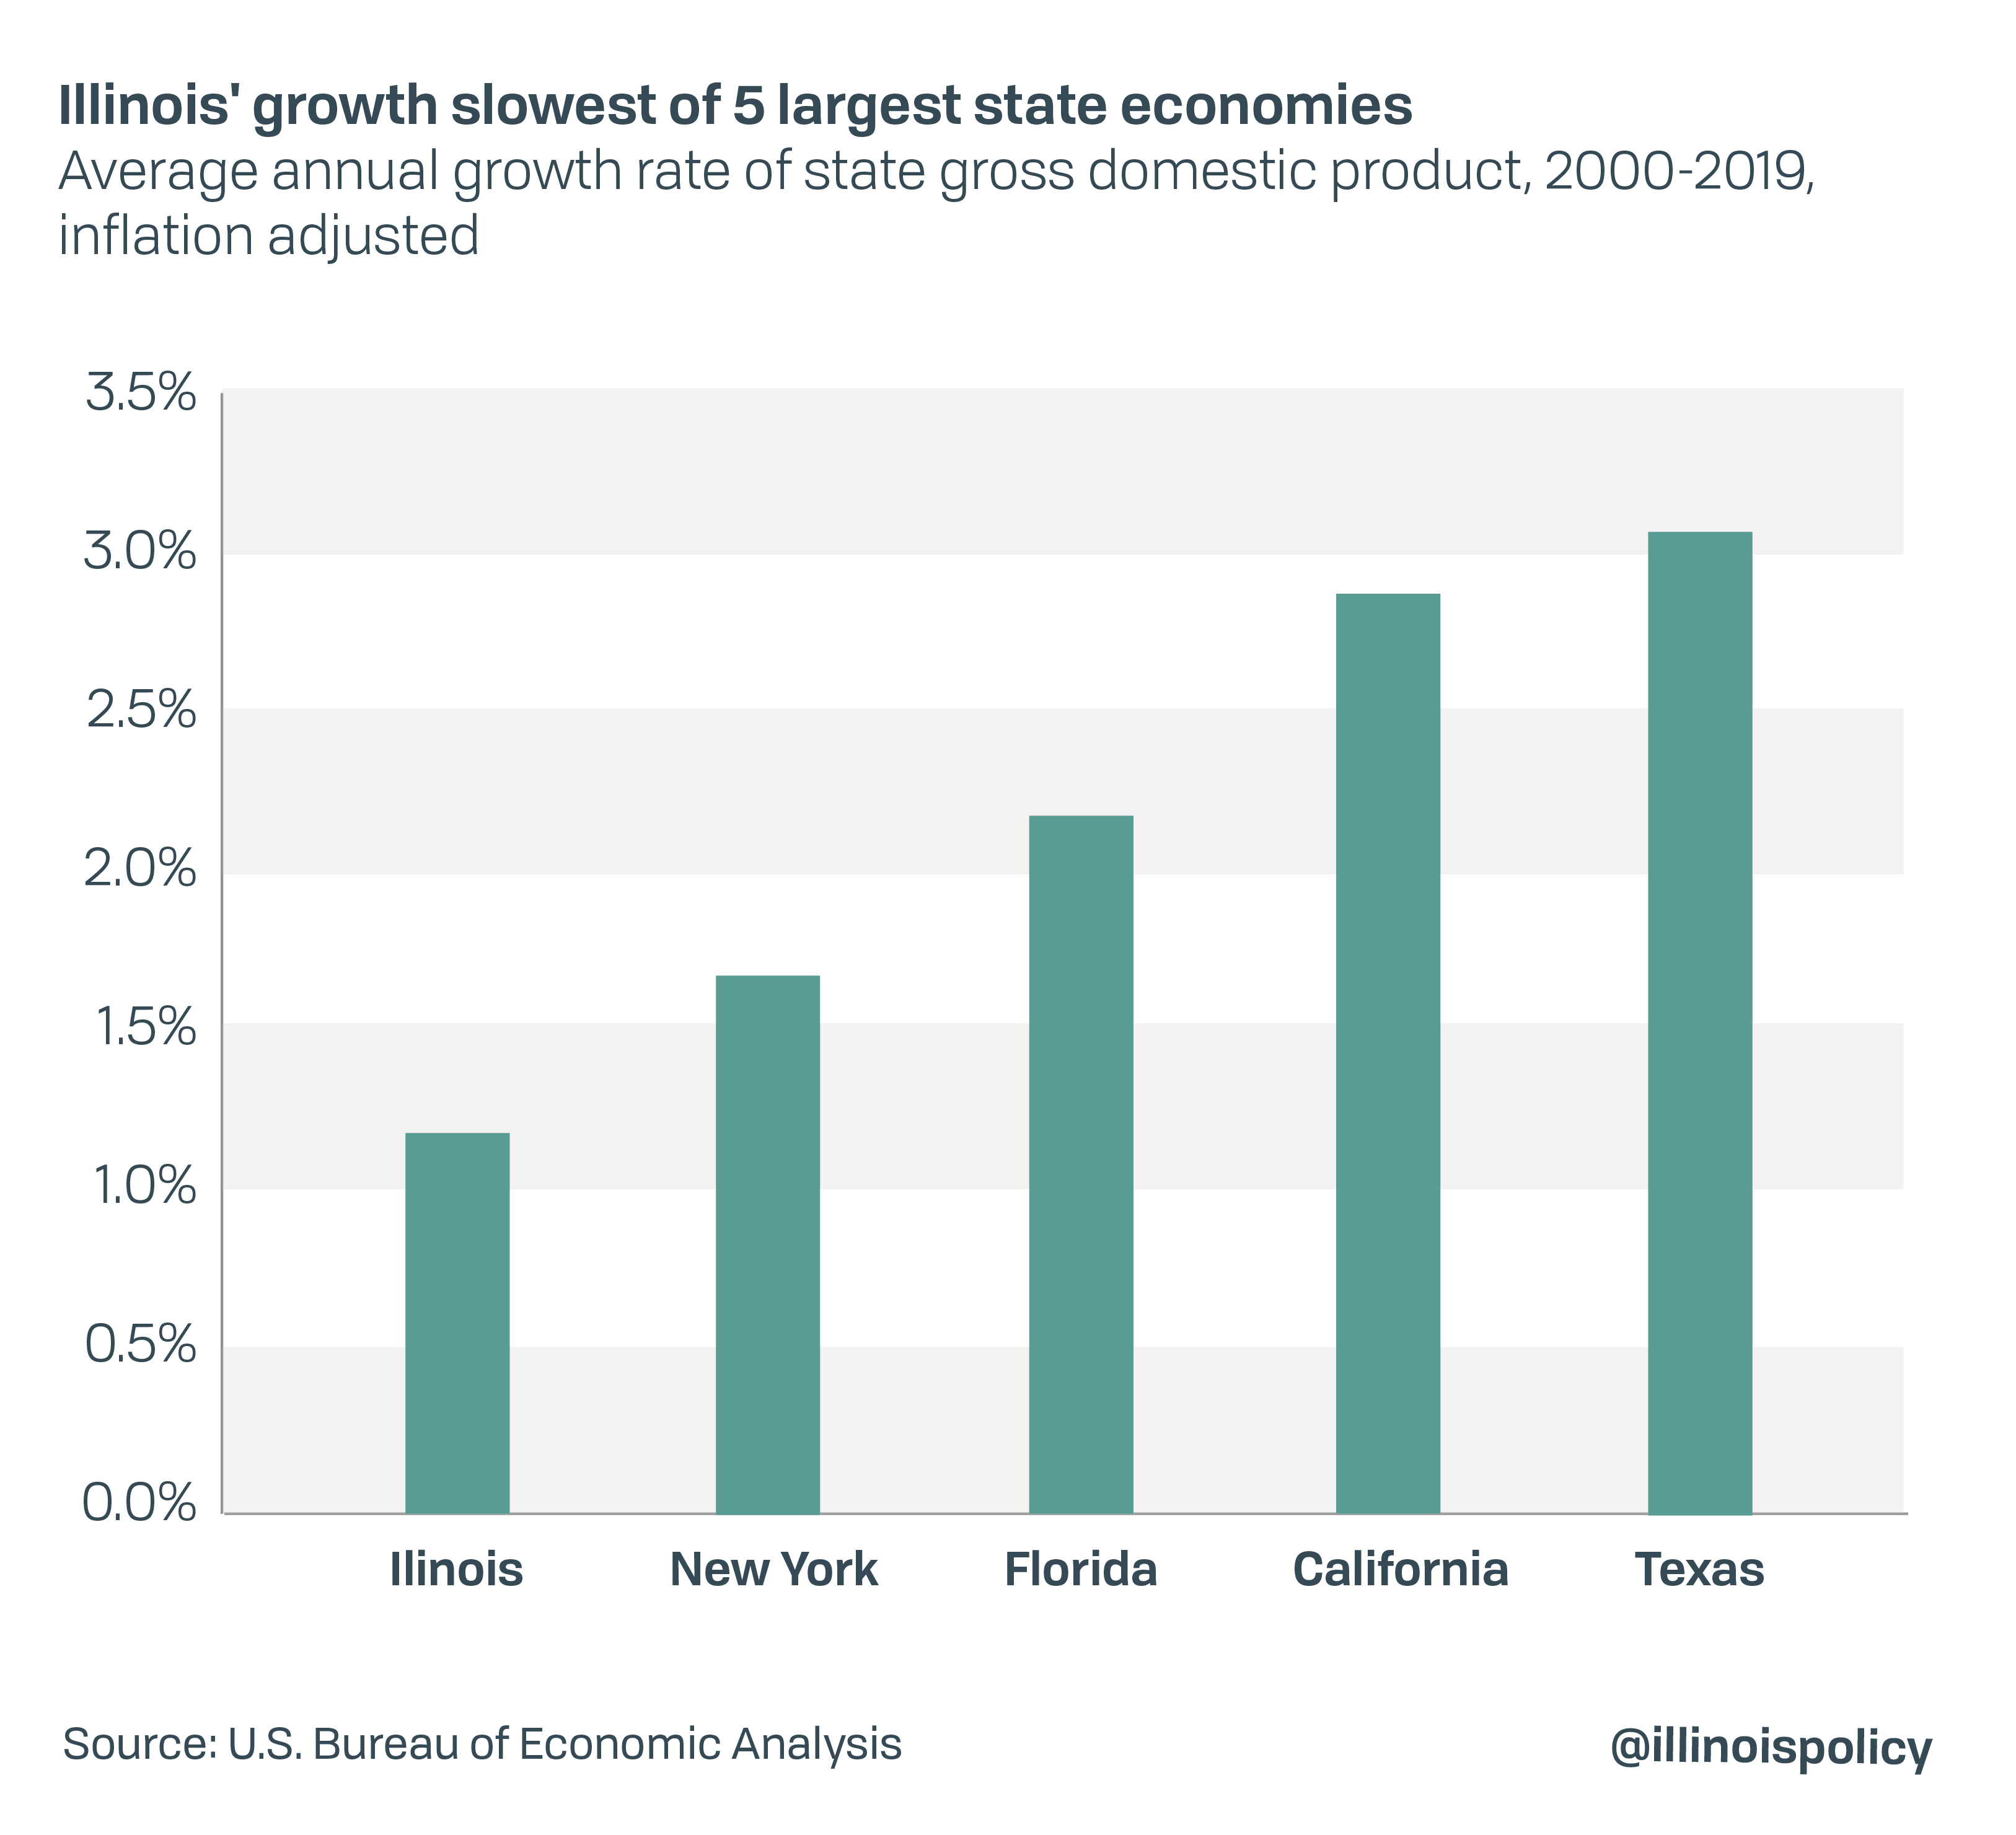 Illinois' growth slowest of 5 largest state economies